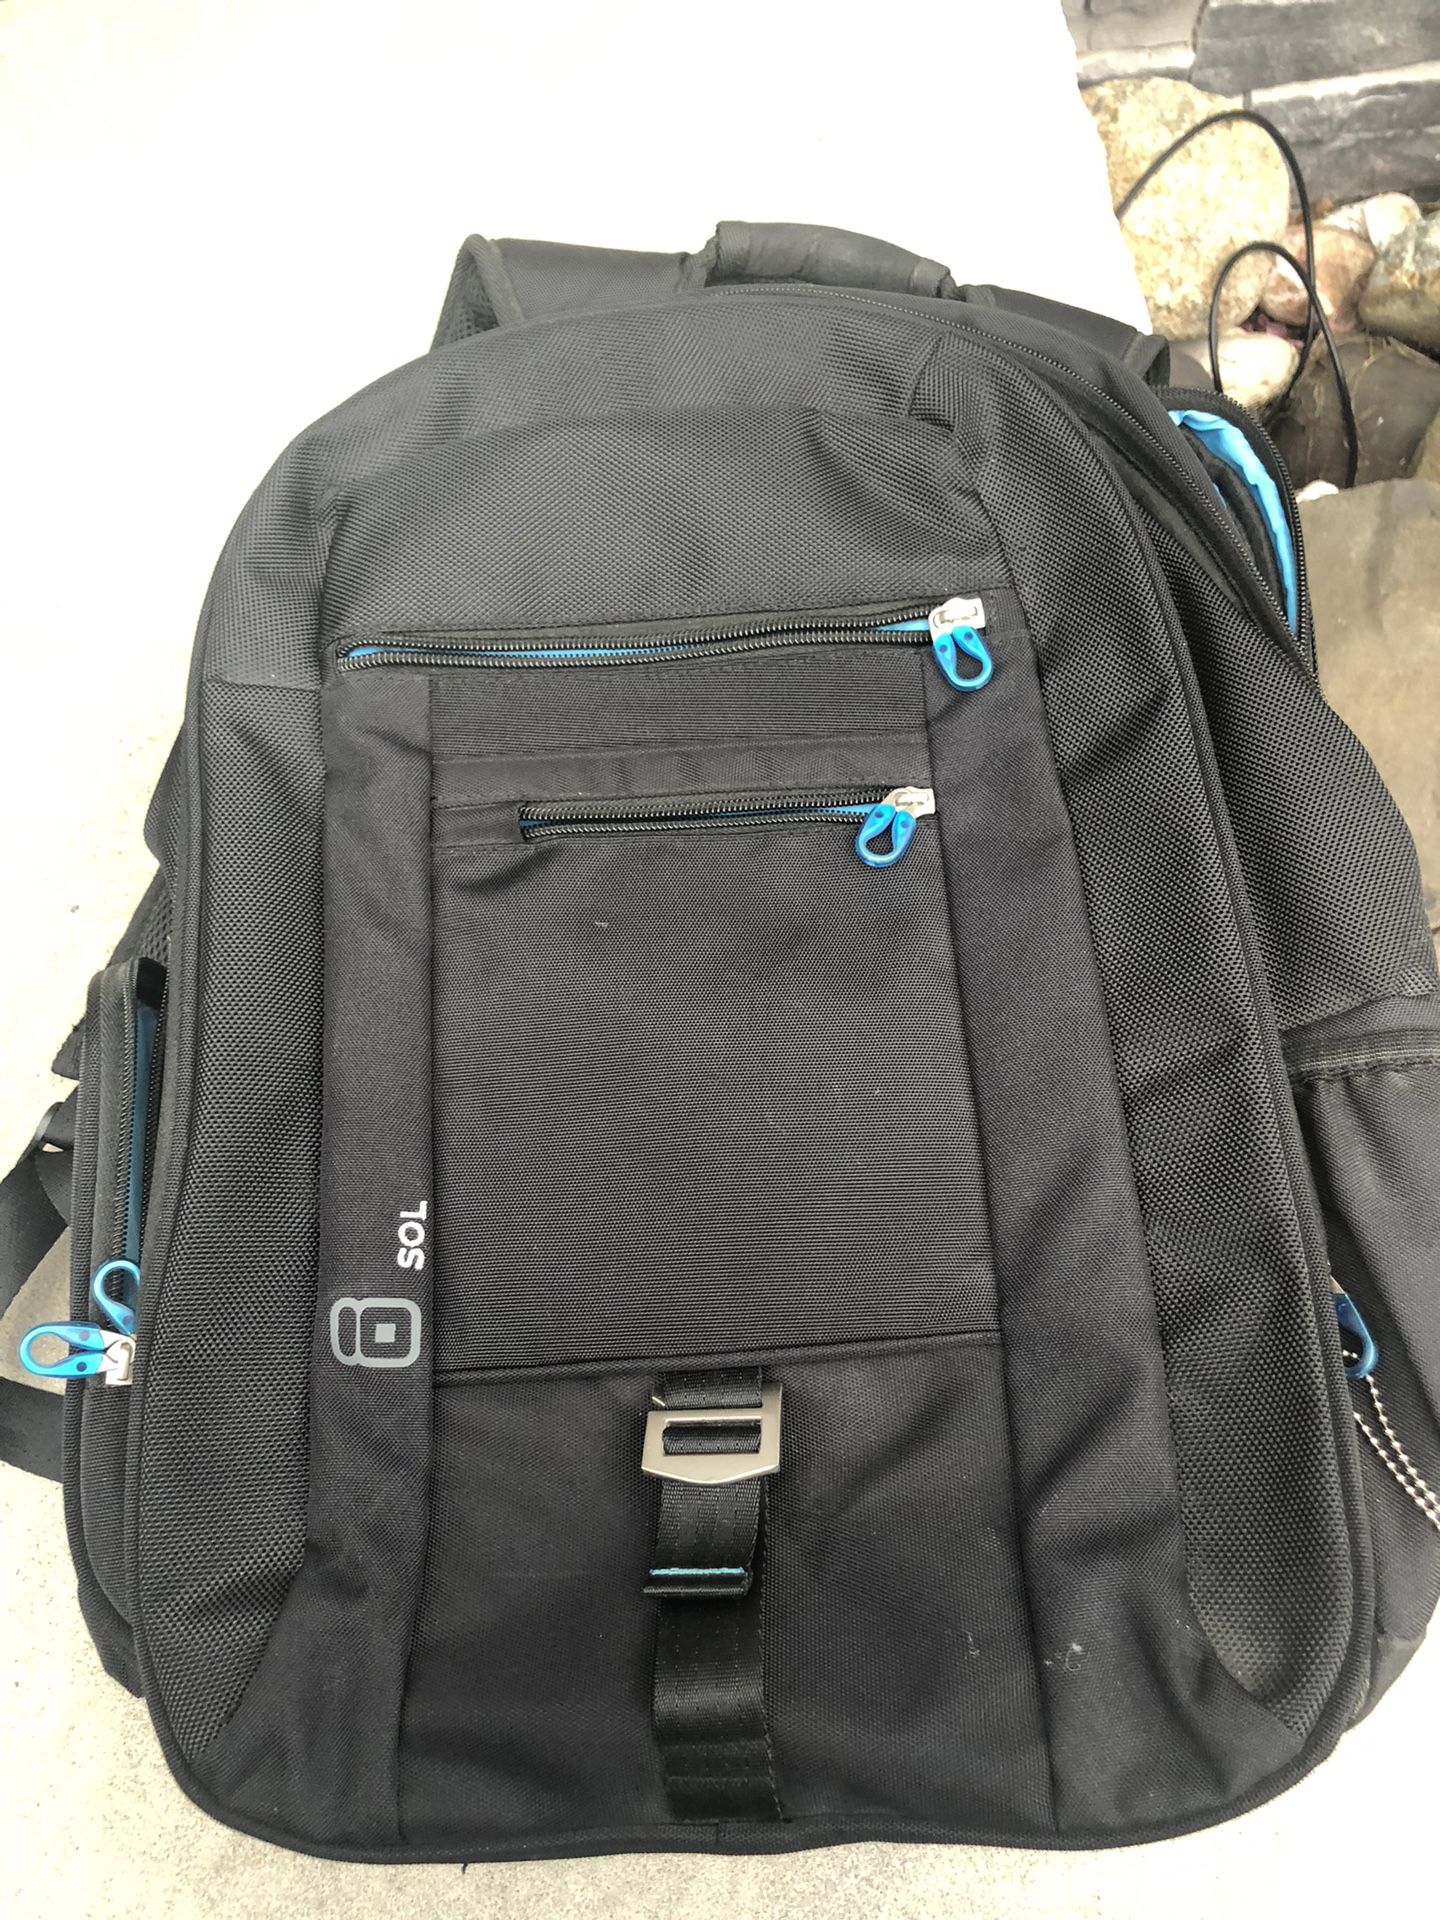 Mint Condition Black Backpack With Trolley Channel